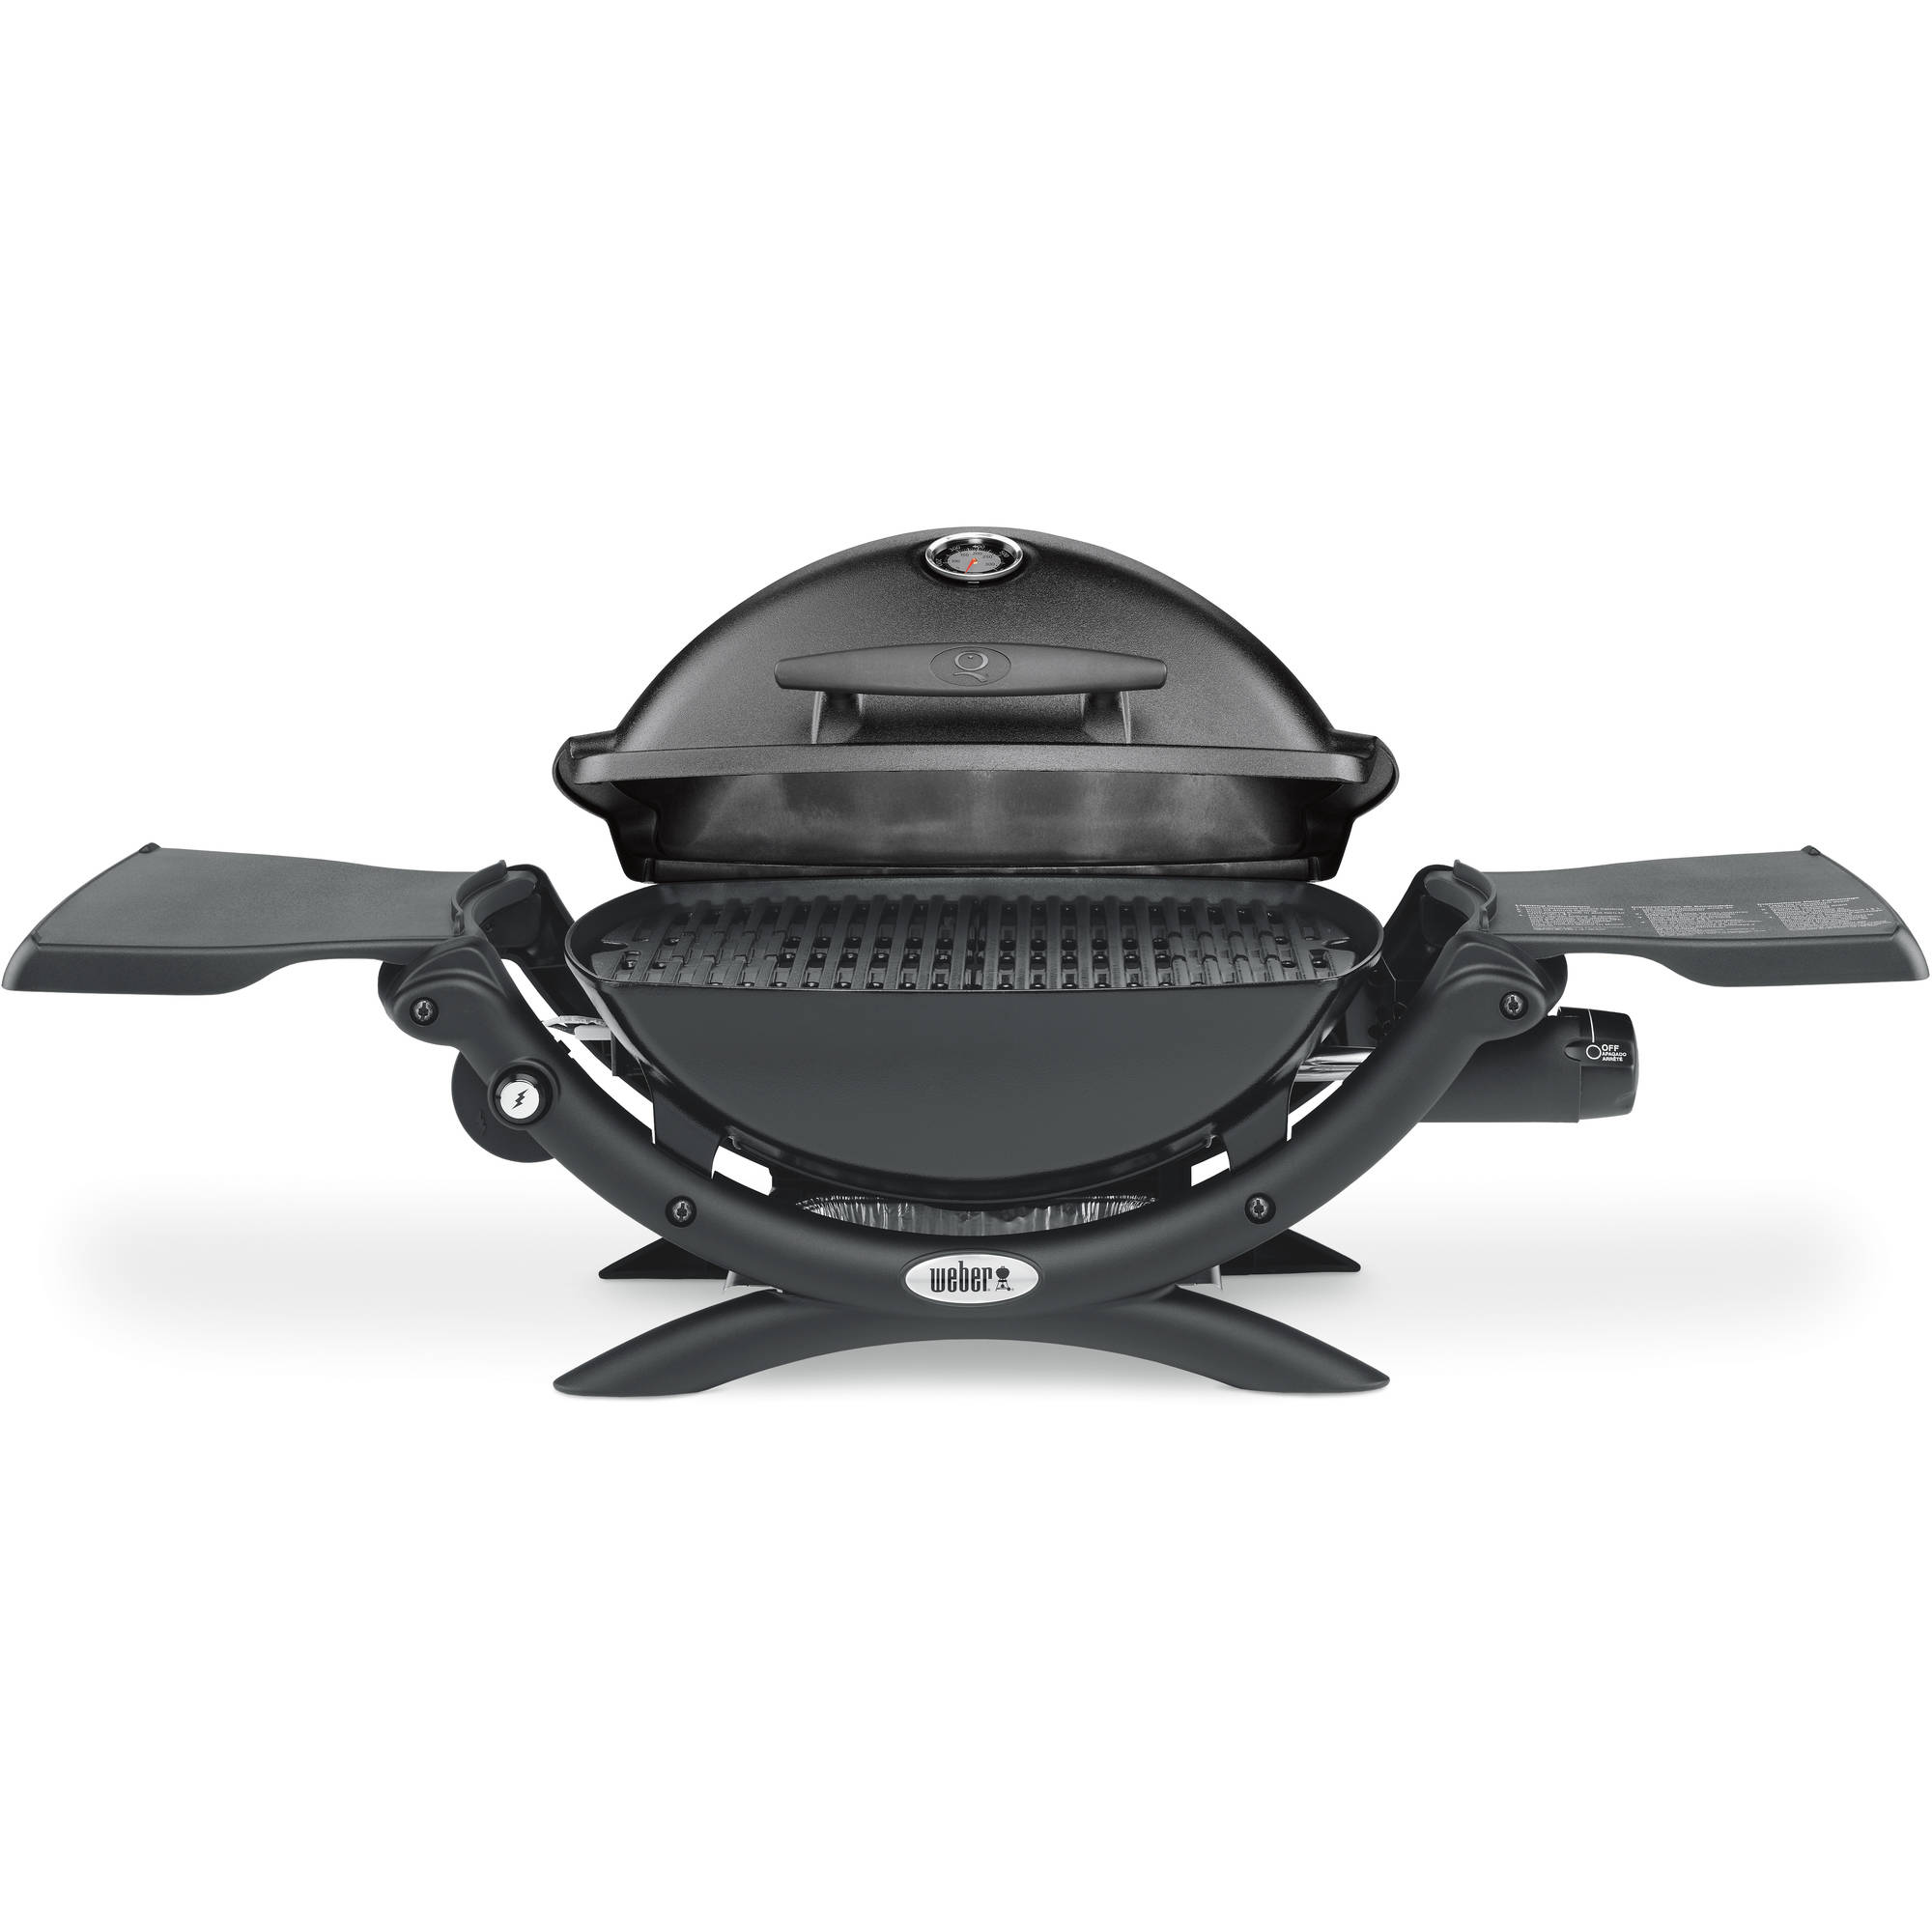 Weber Q 1200 Portable Gas Grill, Black - image 5 of 8